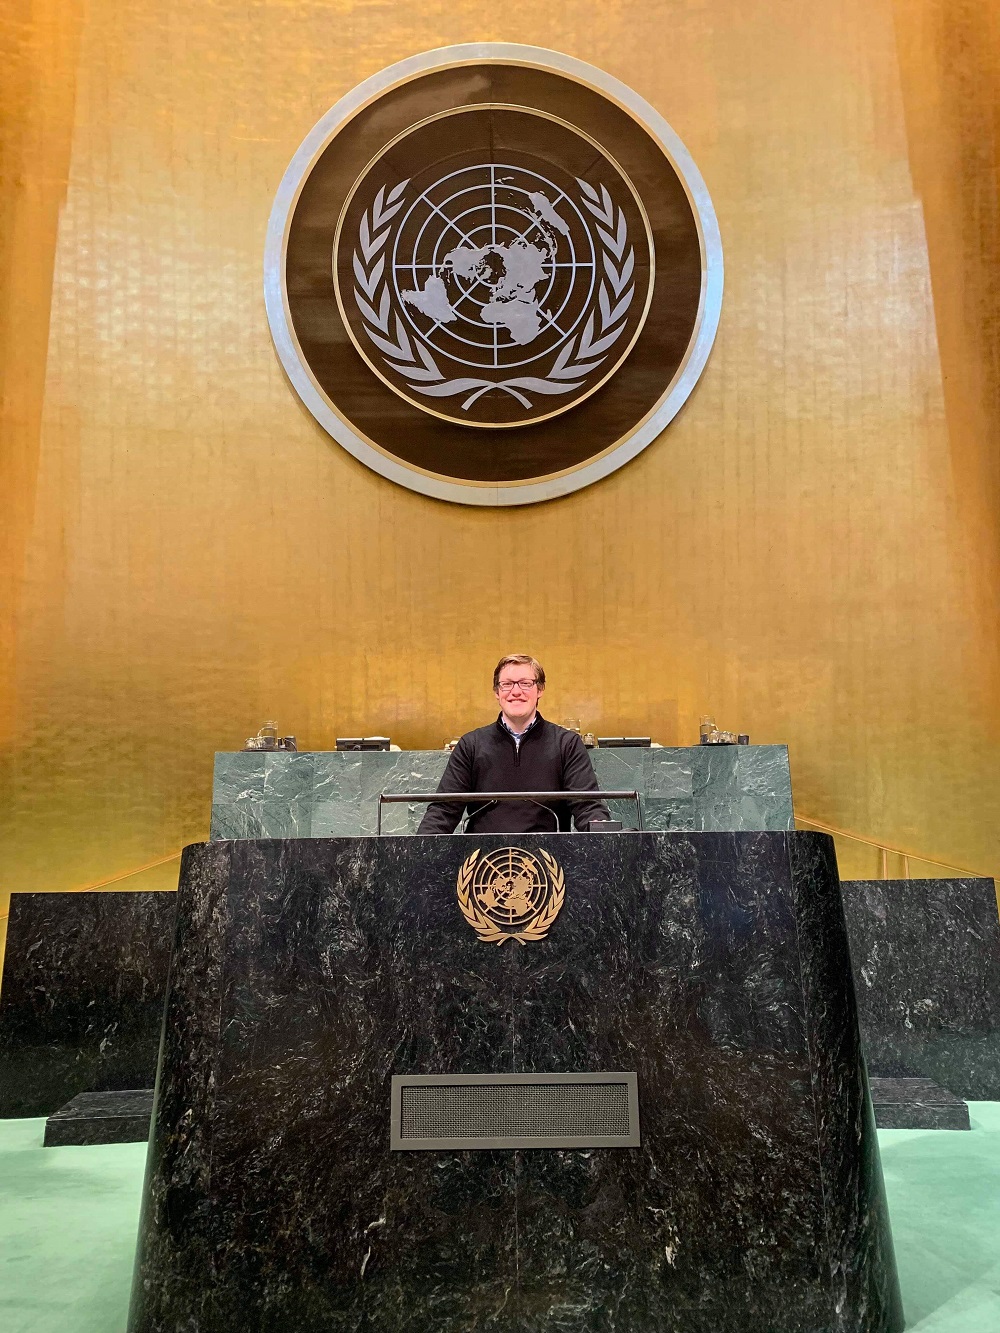 Mr Synnott at the podium of the UN General Assembly. - Photo: Jarred Synnott